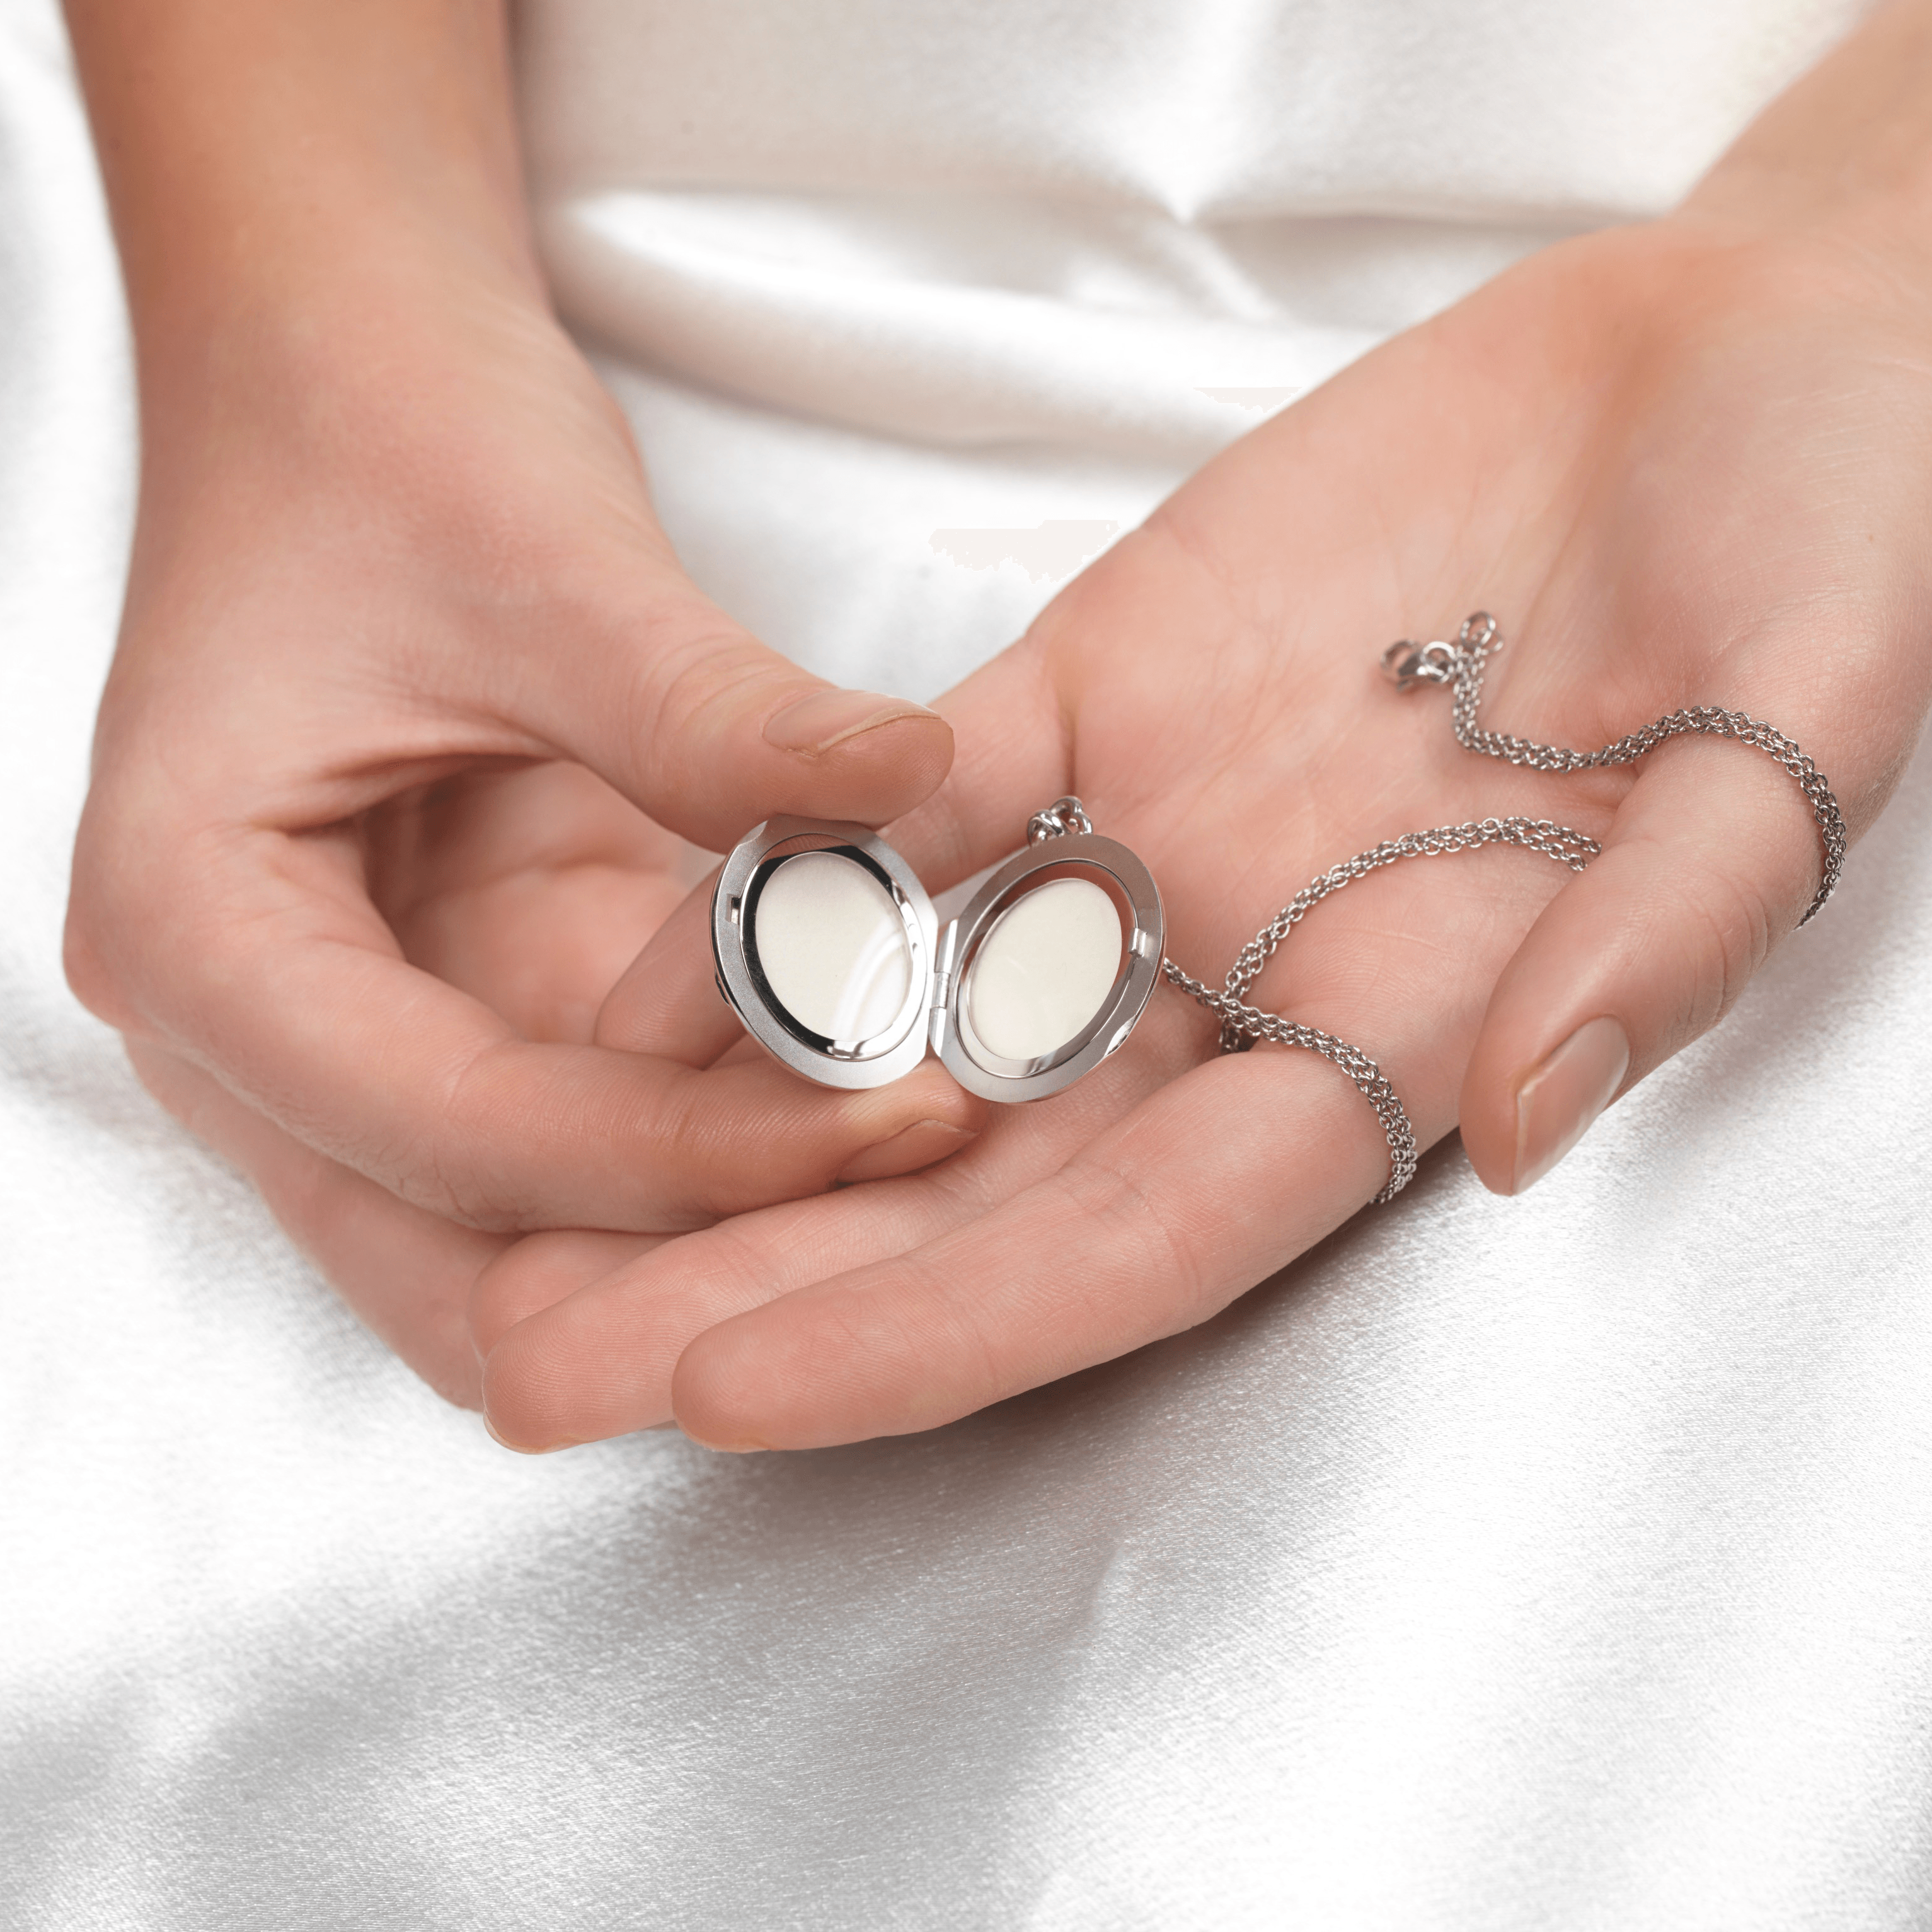 Model holding open an 18 ct white gold round locket on an 18 ct white gold chain